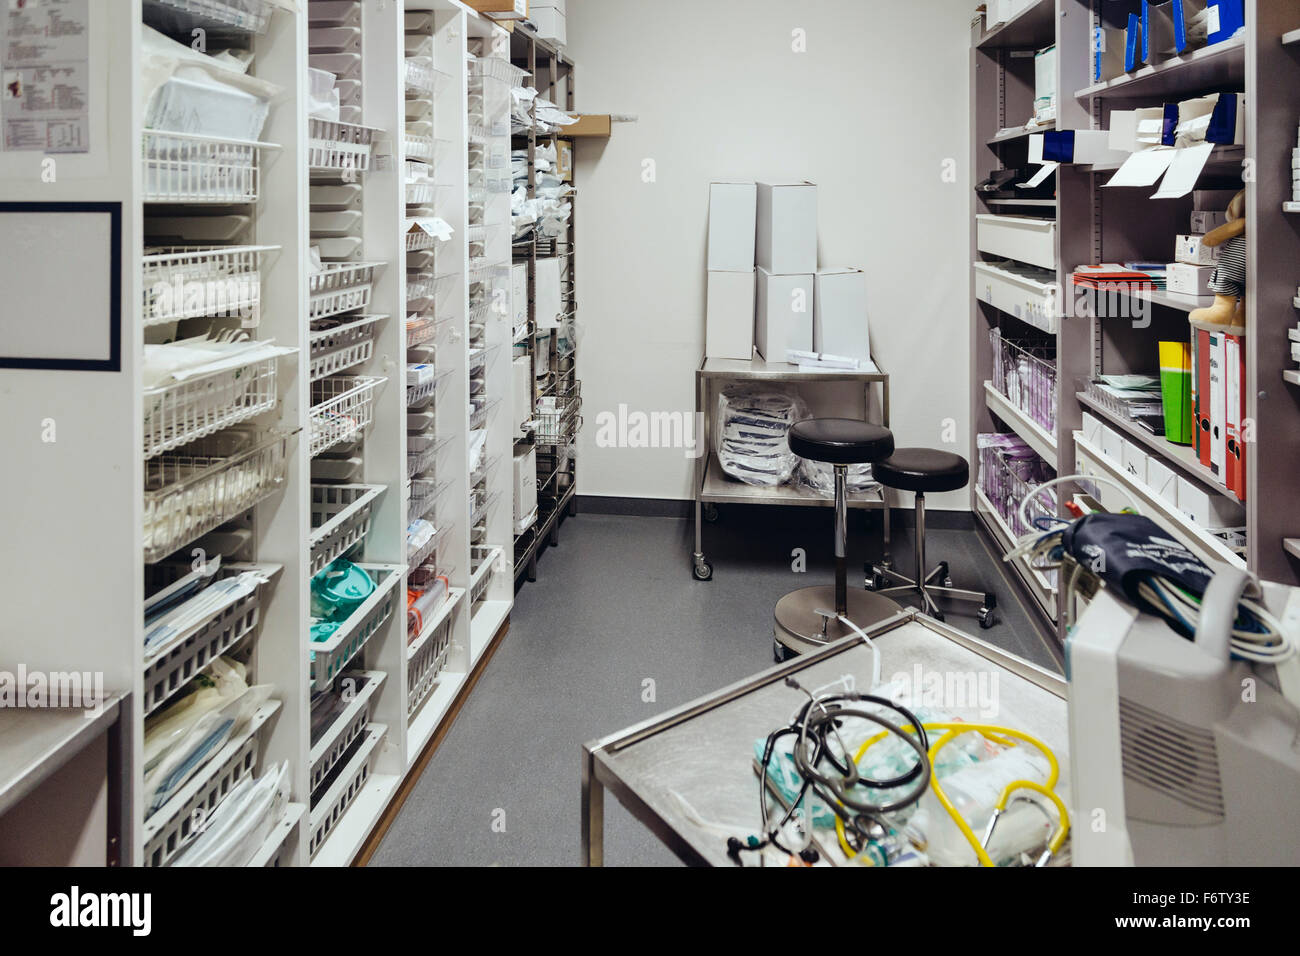 Back room of operating room with sterile instruments in shelves for surgery Stock Photo